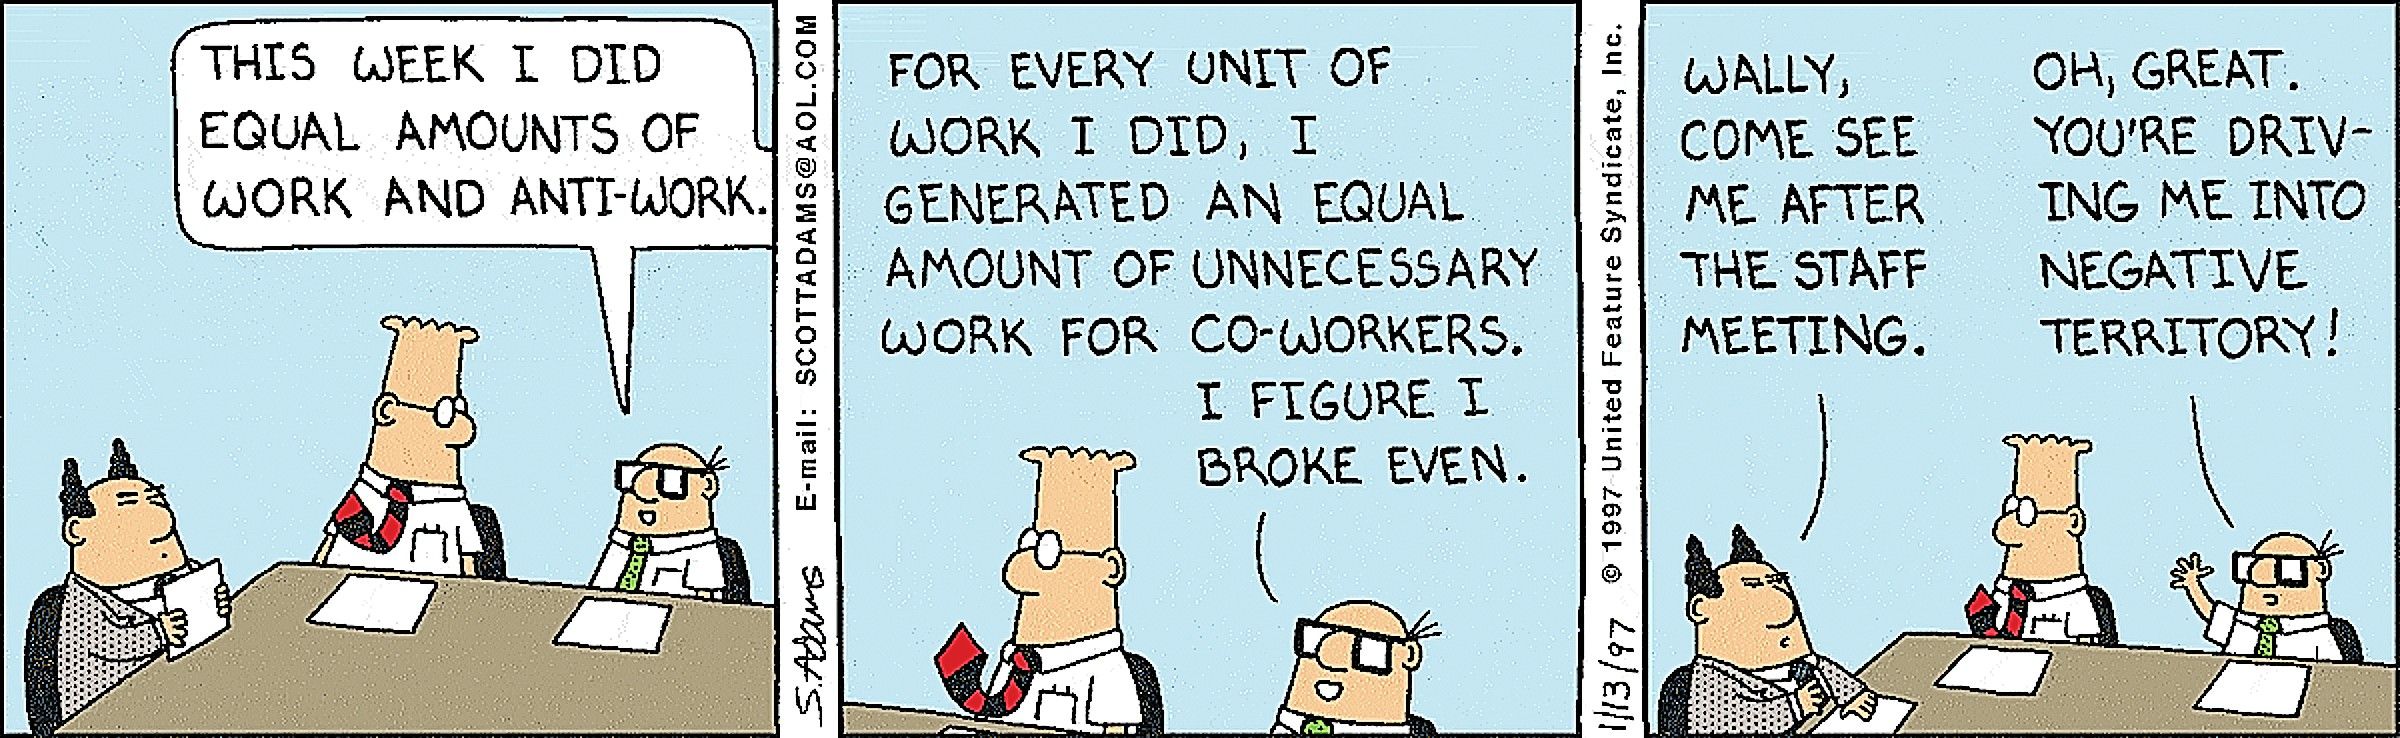 Dilbert, Wally explains his concept of work and anti-work